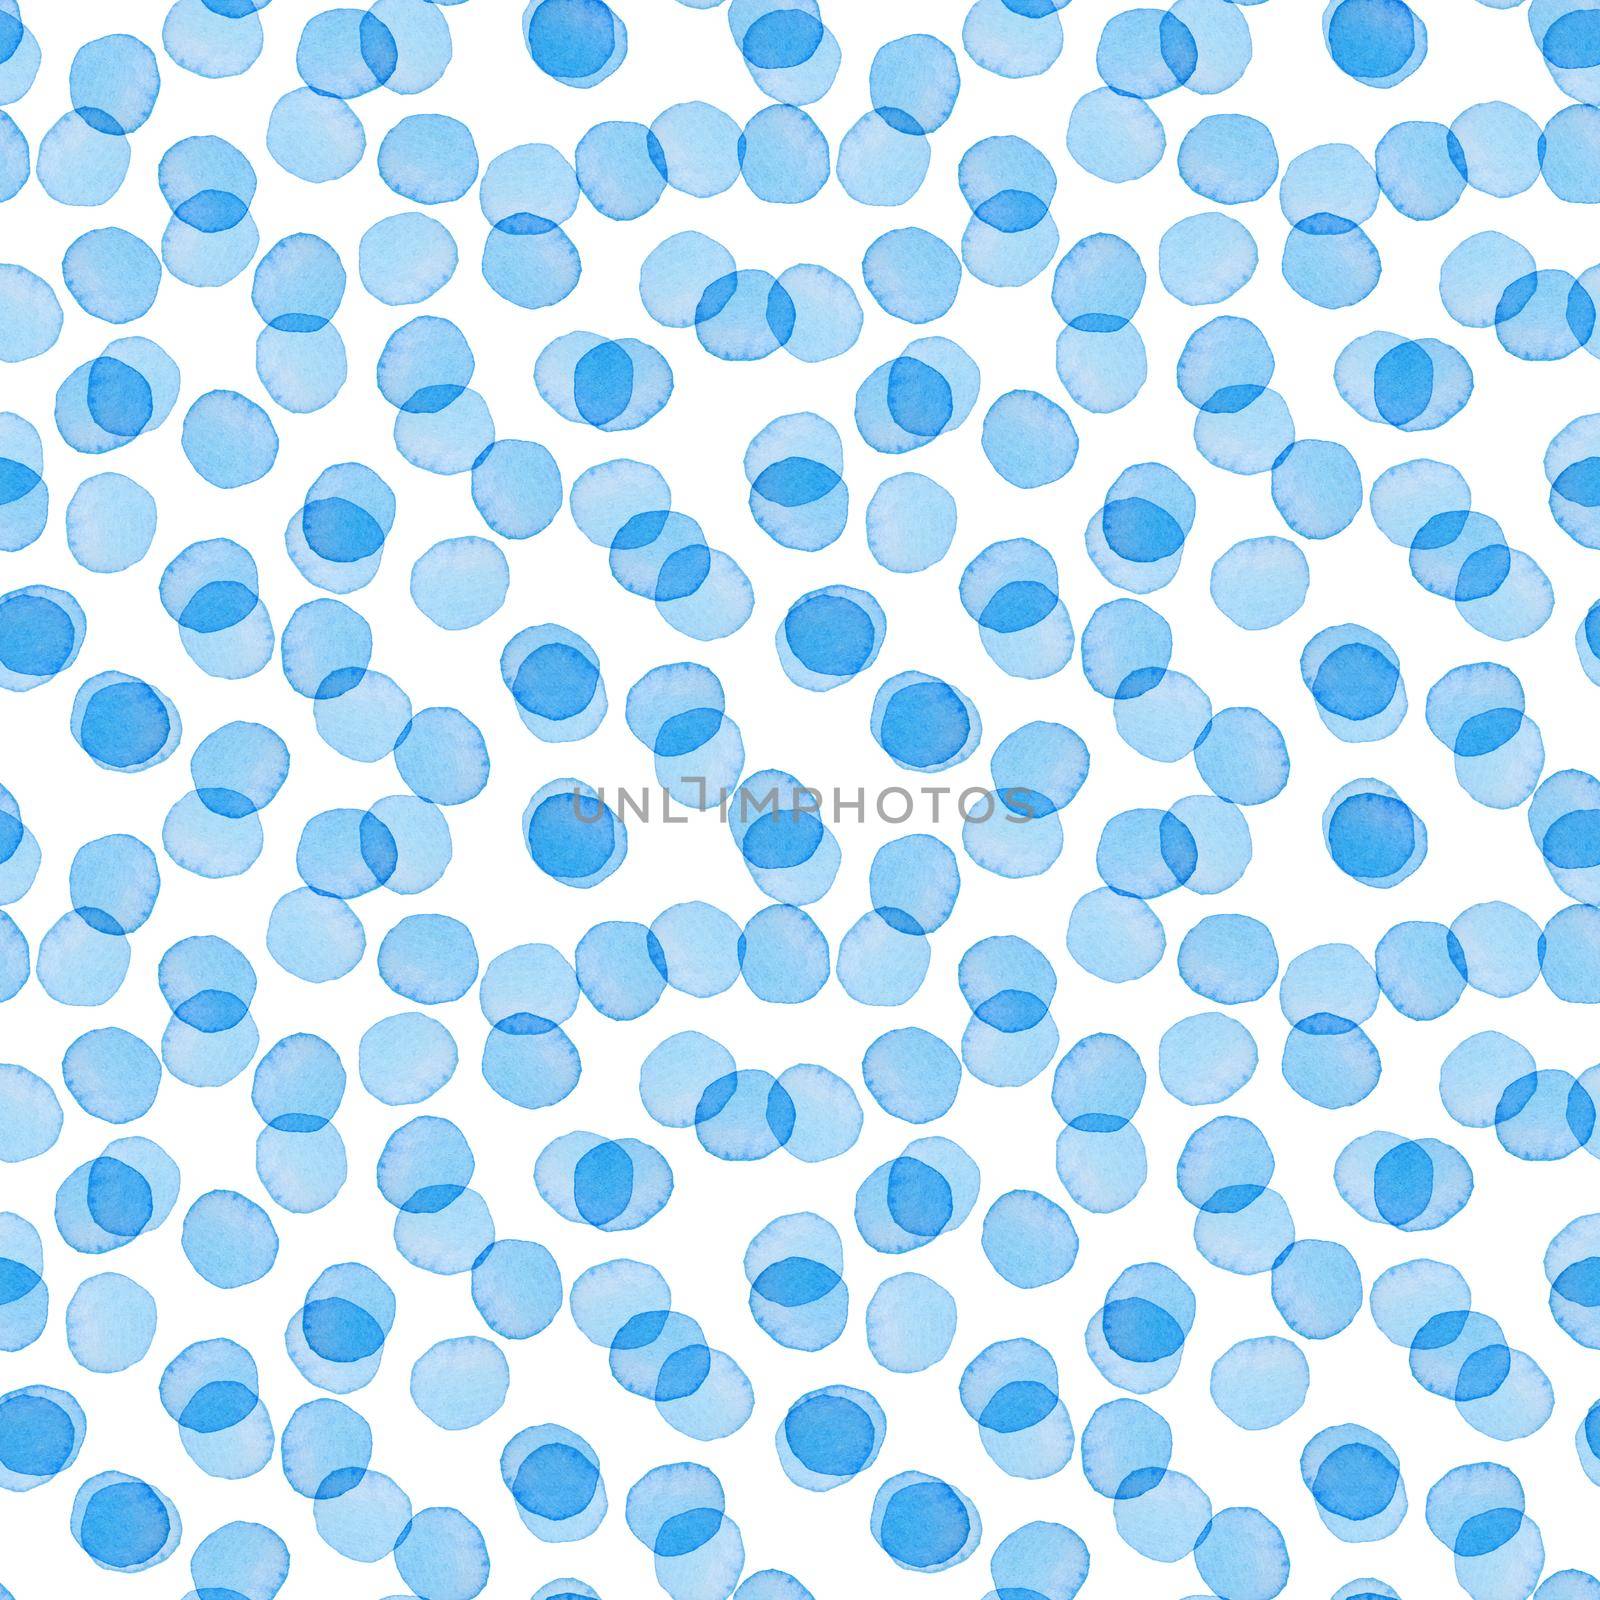 Hand Painted Brush Polka Dot Seamless Watercolor Pattern. Abstract watercolour Round Circles in Blue Color. Artistic Design for Fabric and Background.